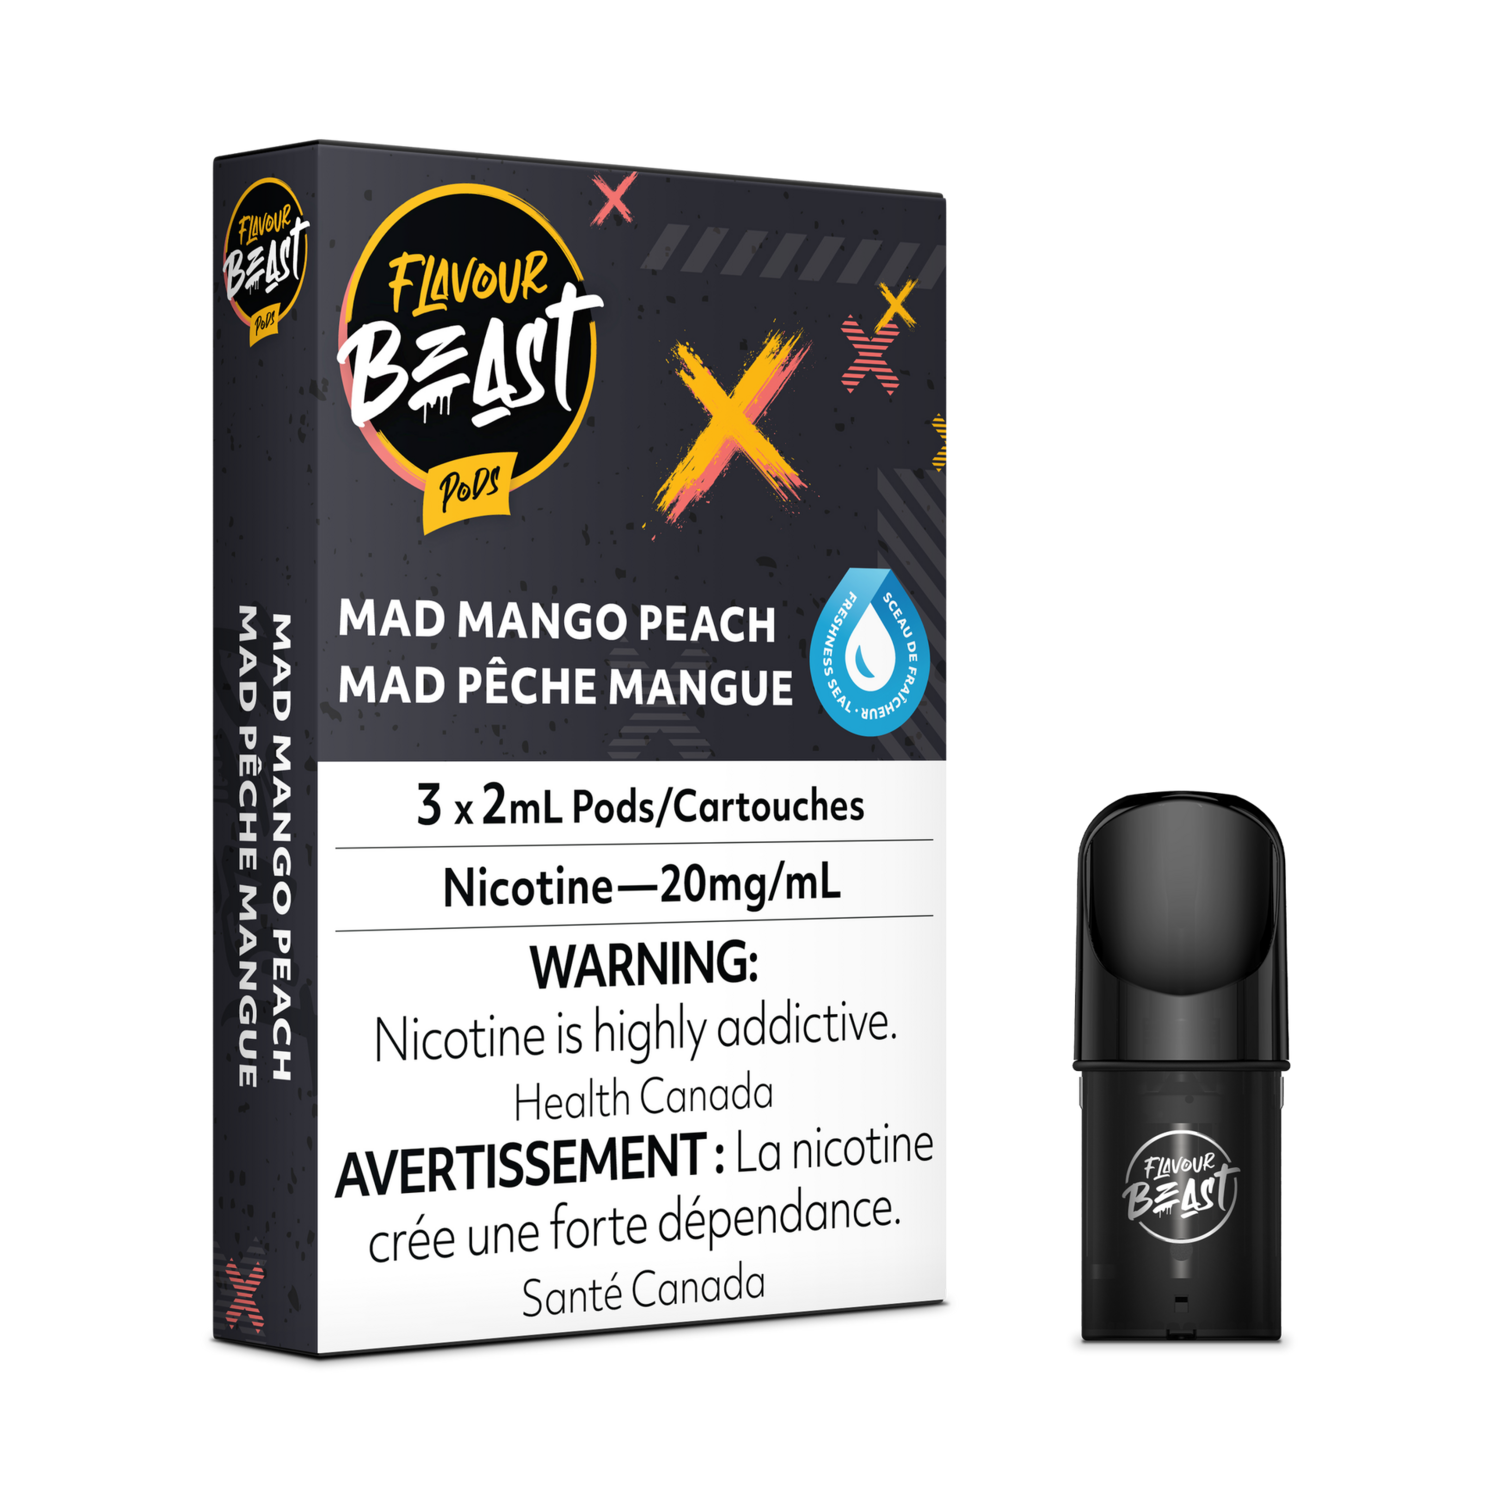 Mad Mango Peach - Flavour Beast Pods (S-Compatible)